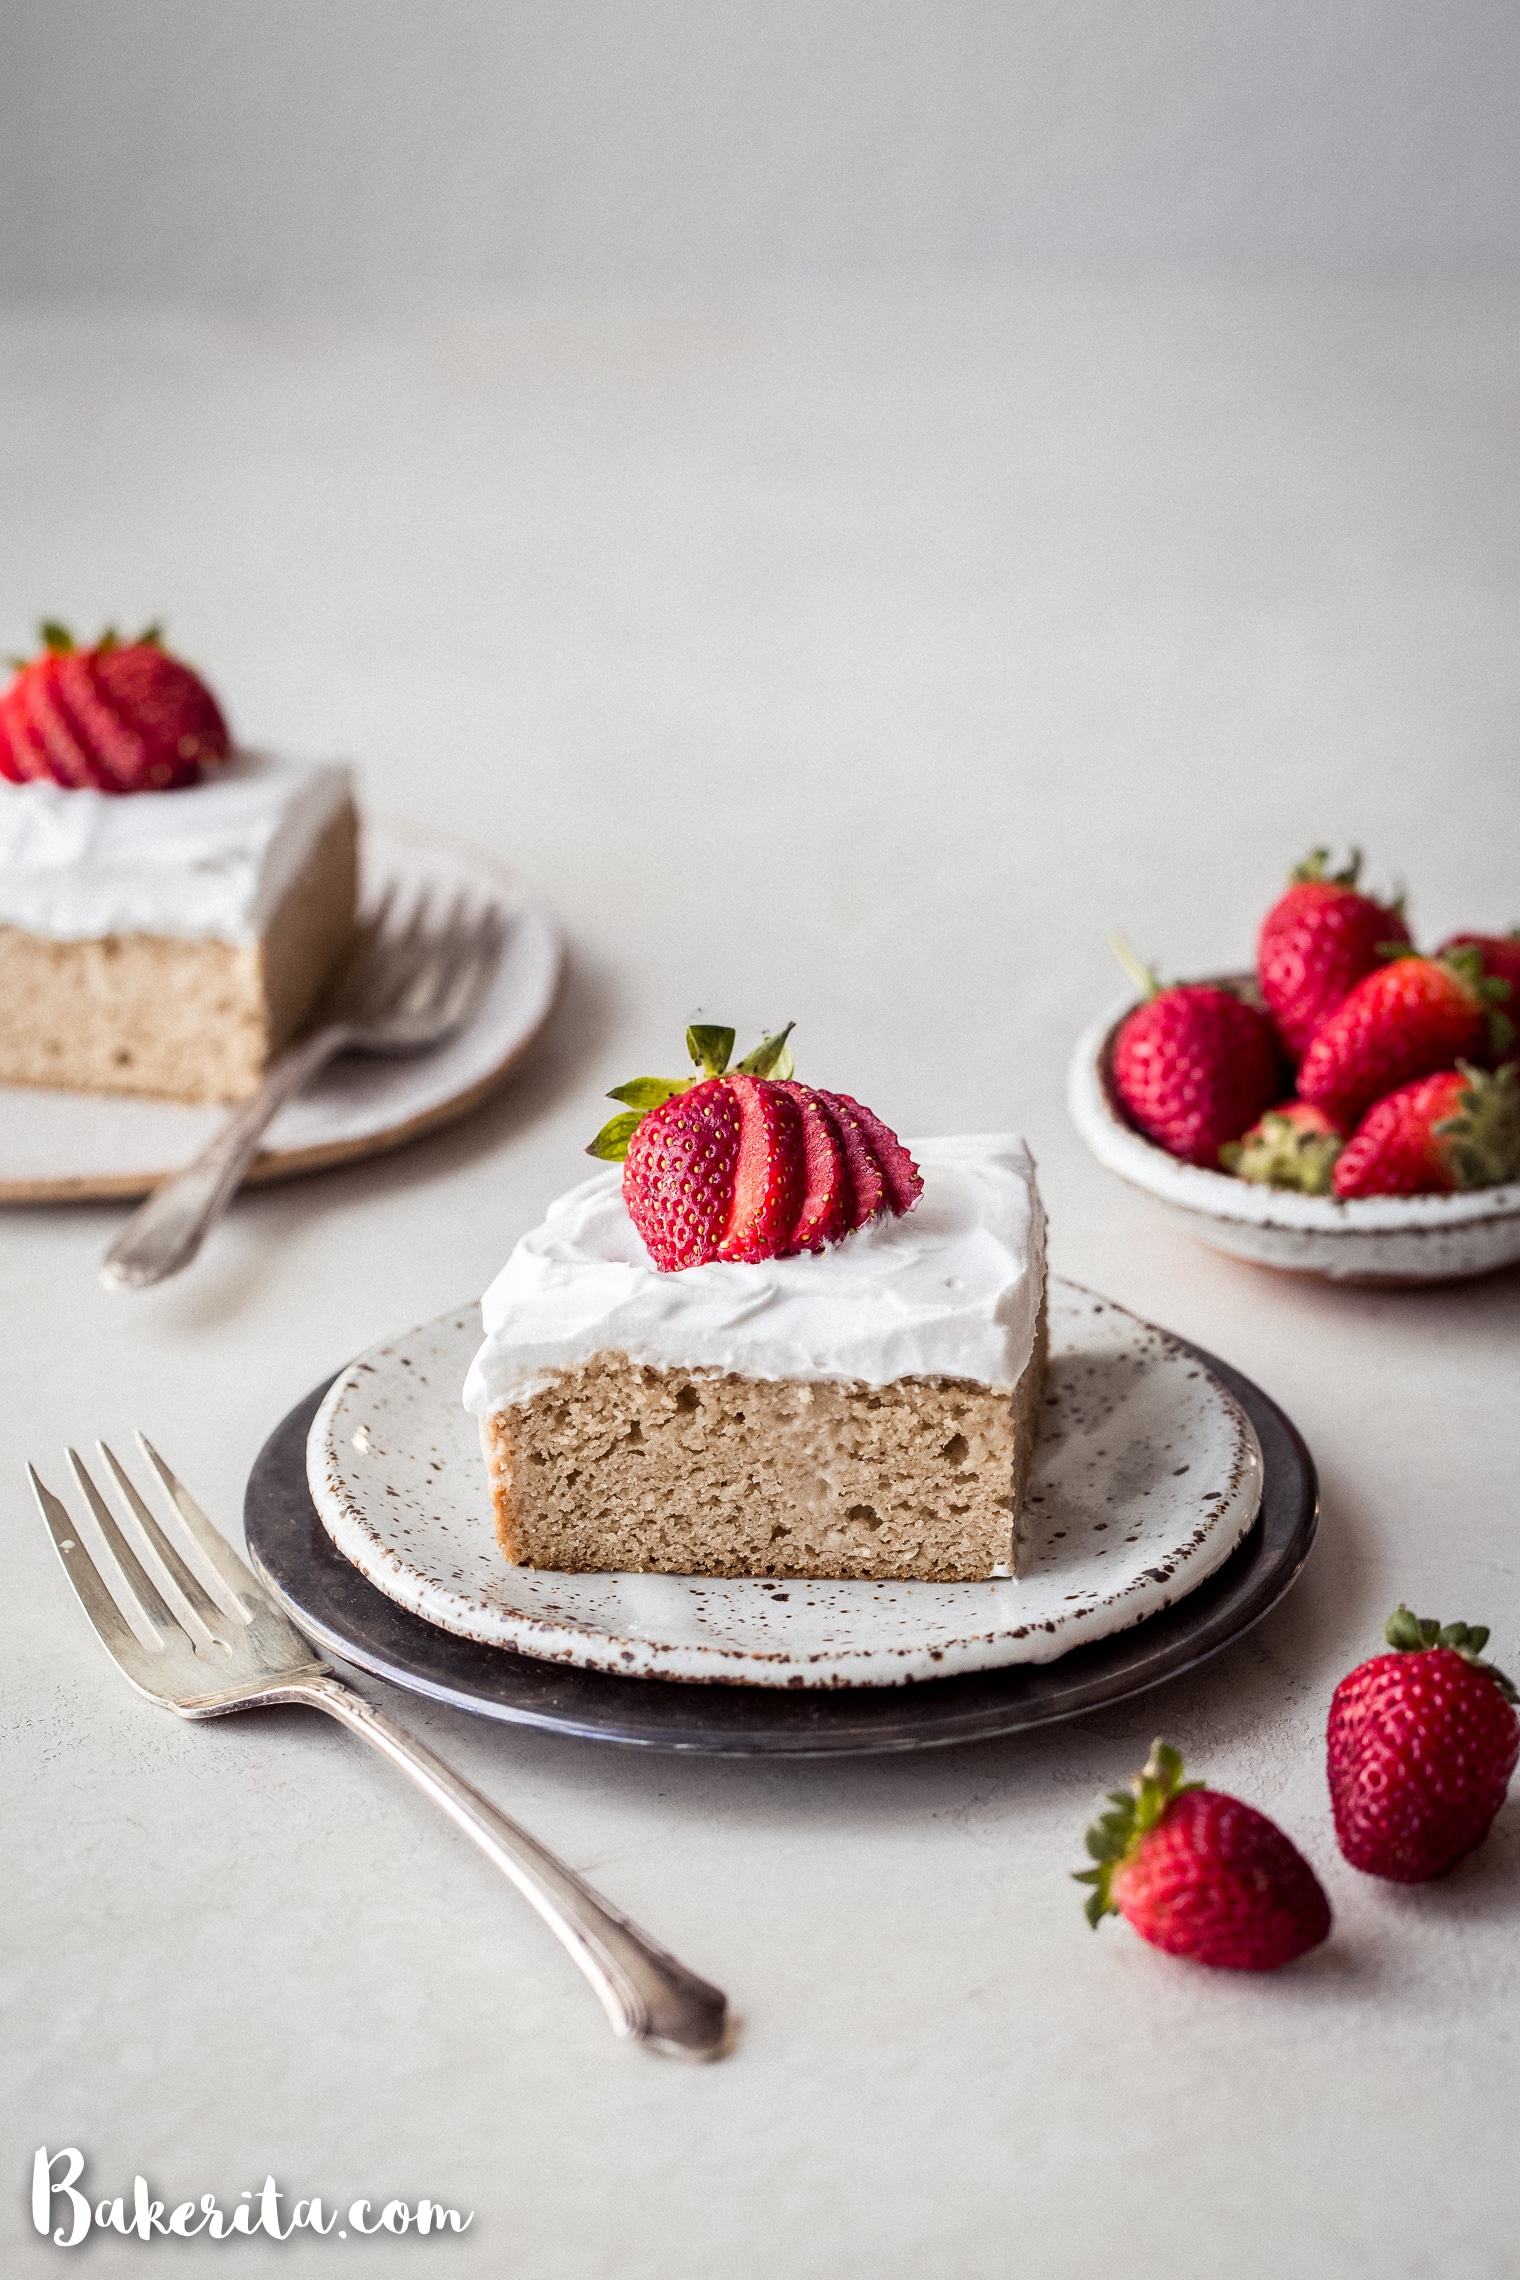 This Gluten-Free Tres Leches Cake is soaked with evaporated coconut milk & sweetened condensed coconut milk to make a dairy-free version of this classic Latin American dessert. The paleo vanilla sponge cake is deliciously moist and topped with whipped coconut cream. It is dairy-free with a vegan option.